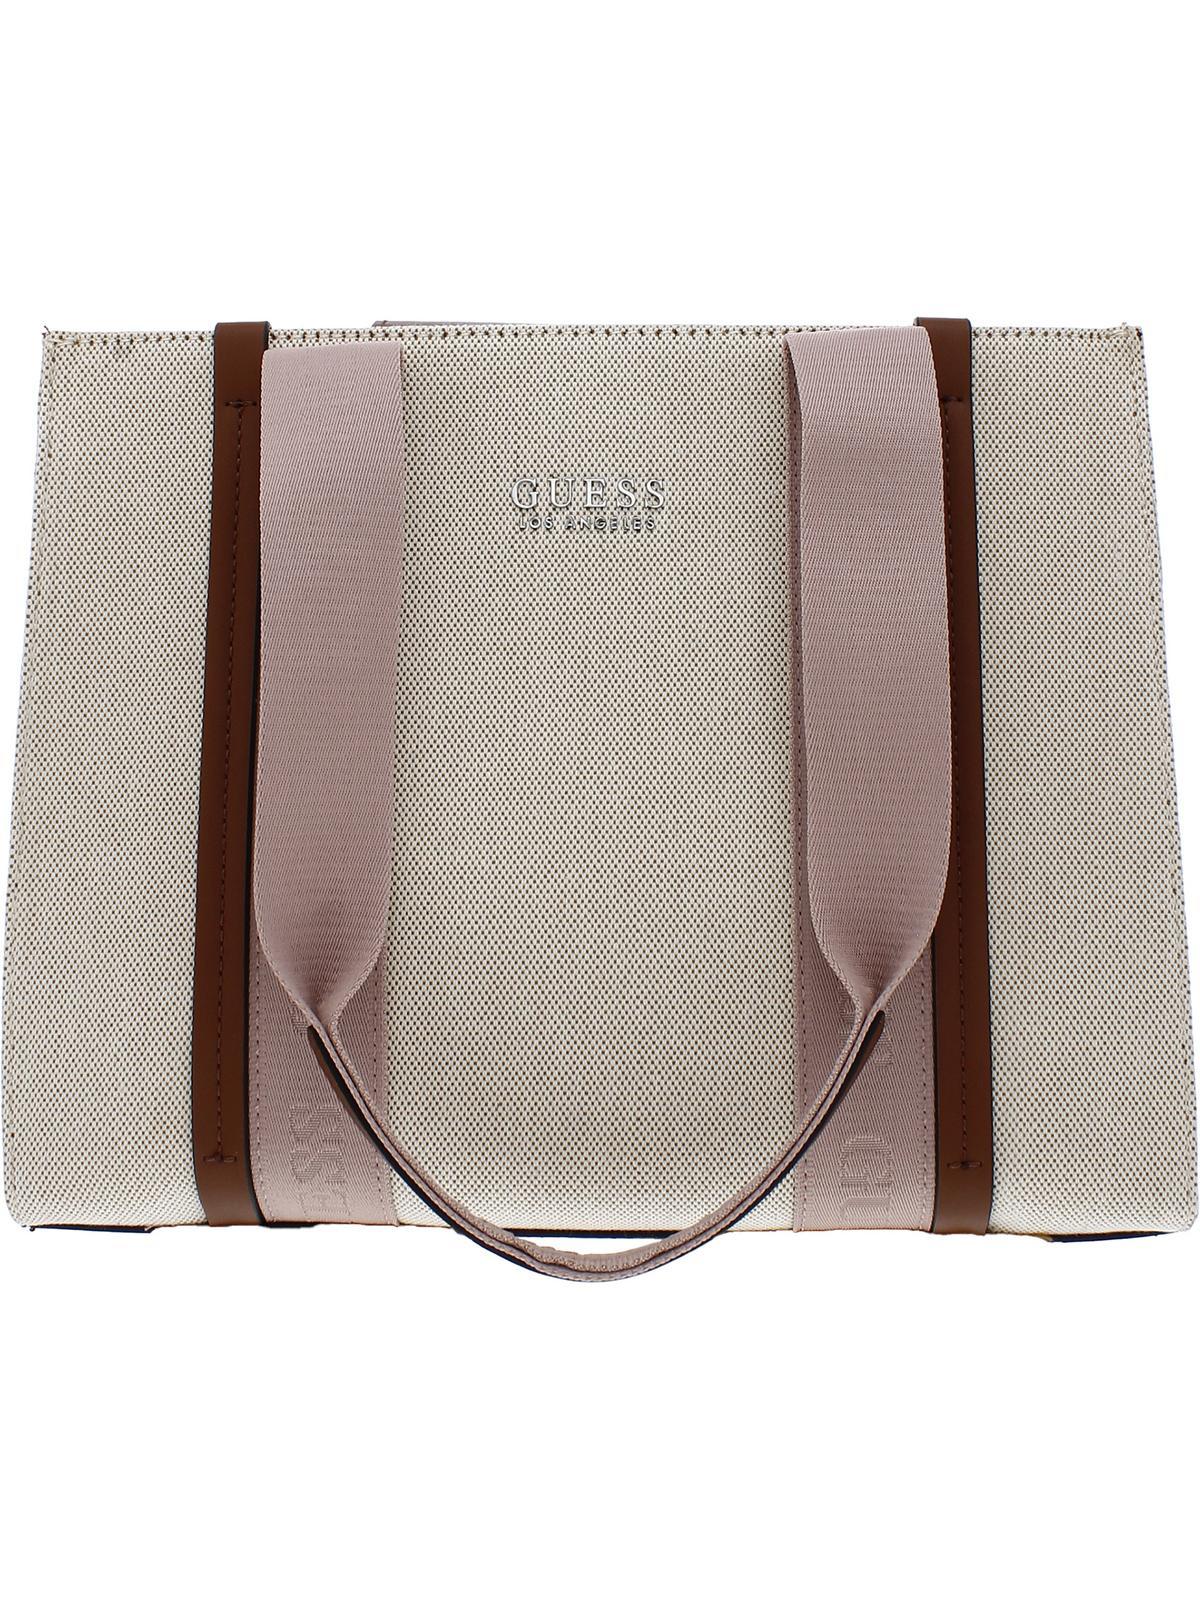 Guess Fabric Double Strap Tote Handbag in Brown | Lyst